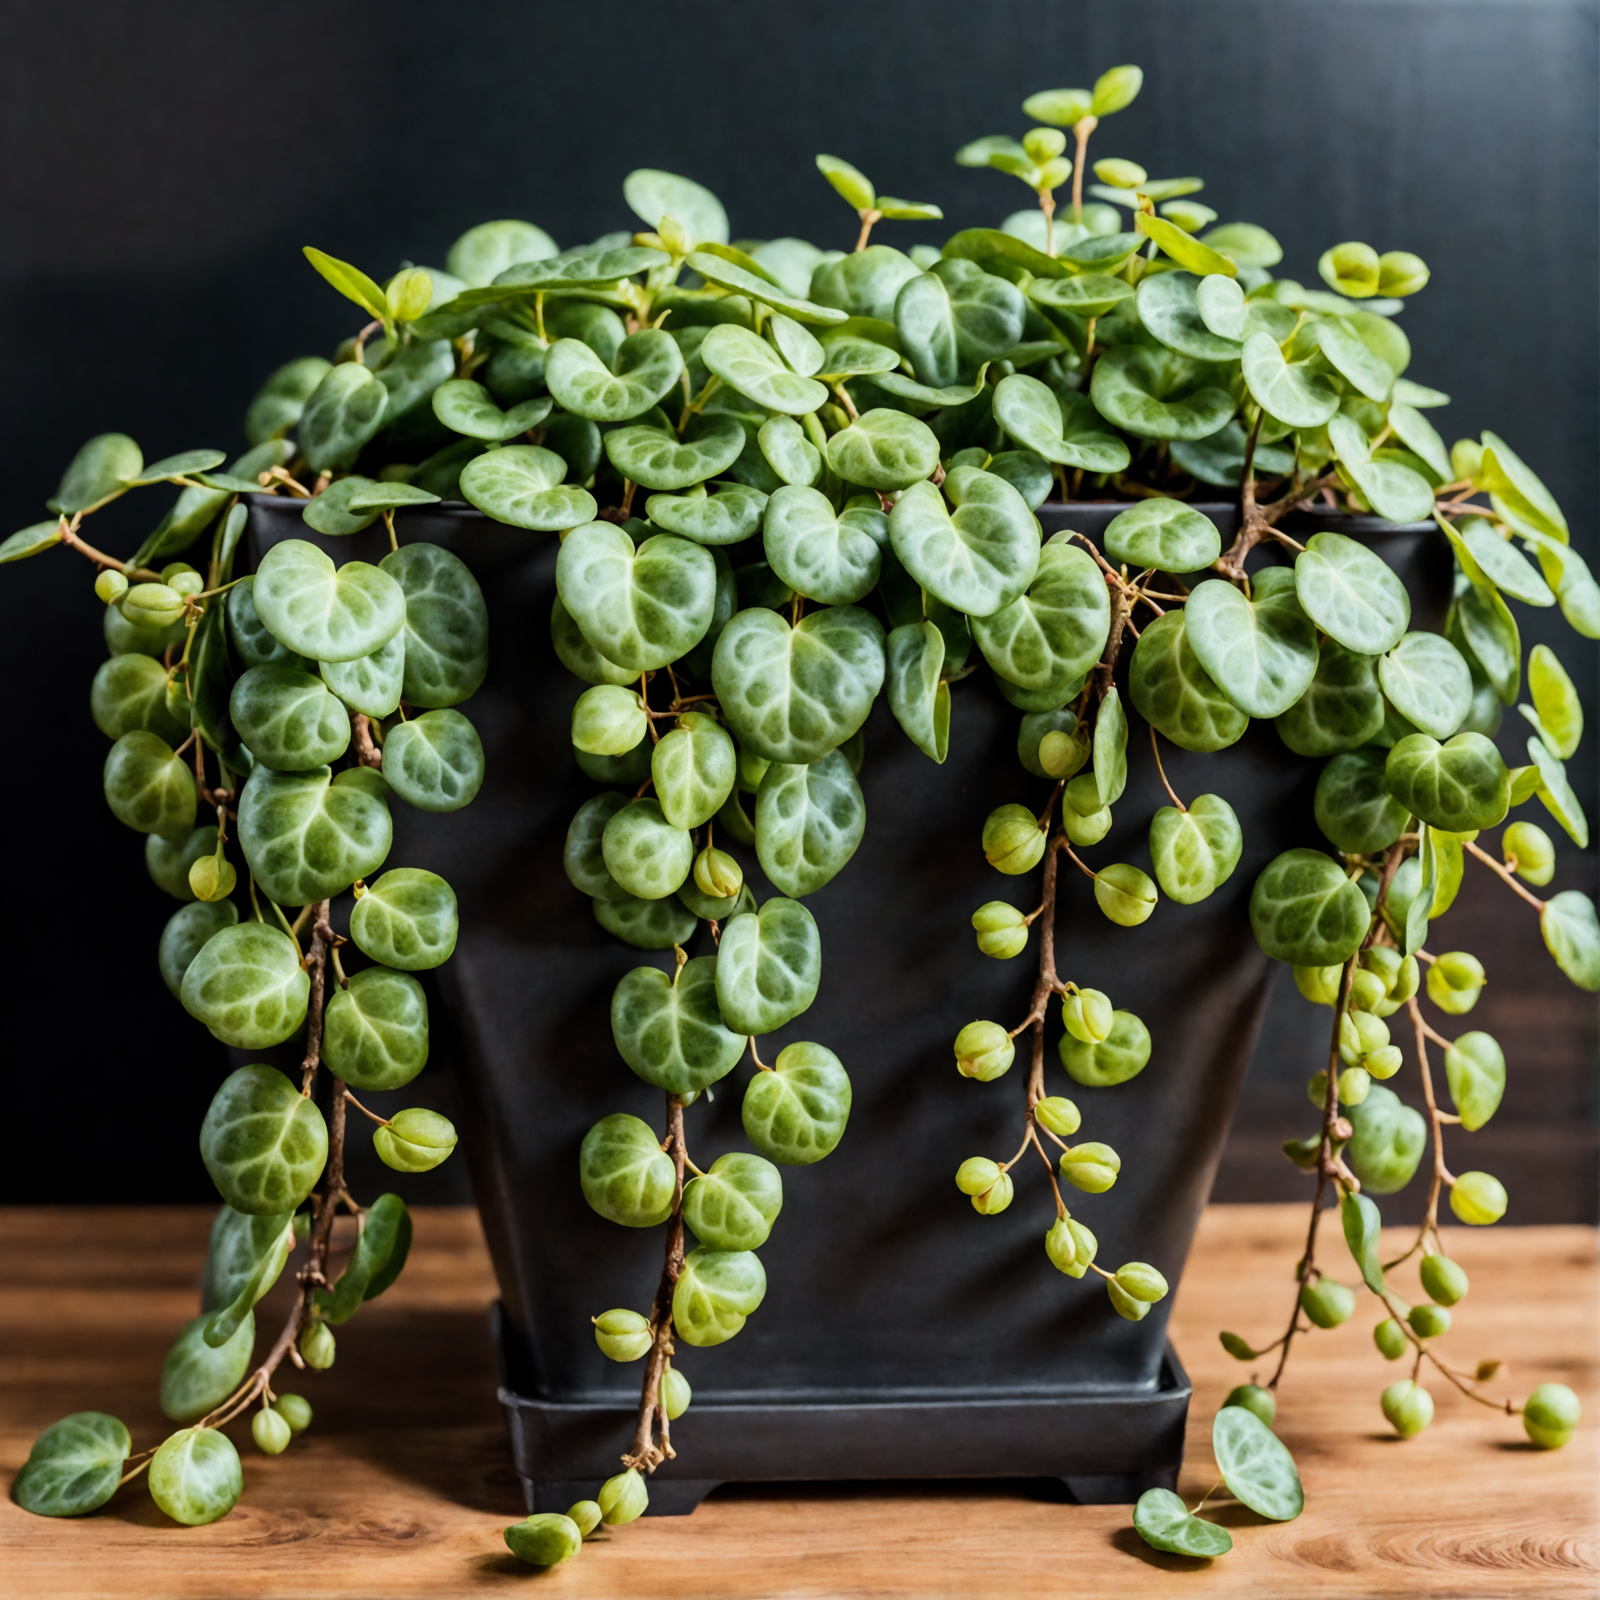 Peperomia prostrata with round leaves on wood, clear lighting, neutral tones, dark background.